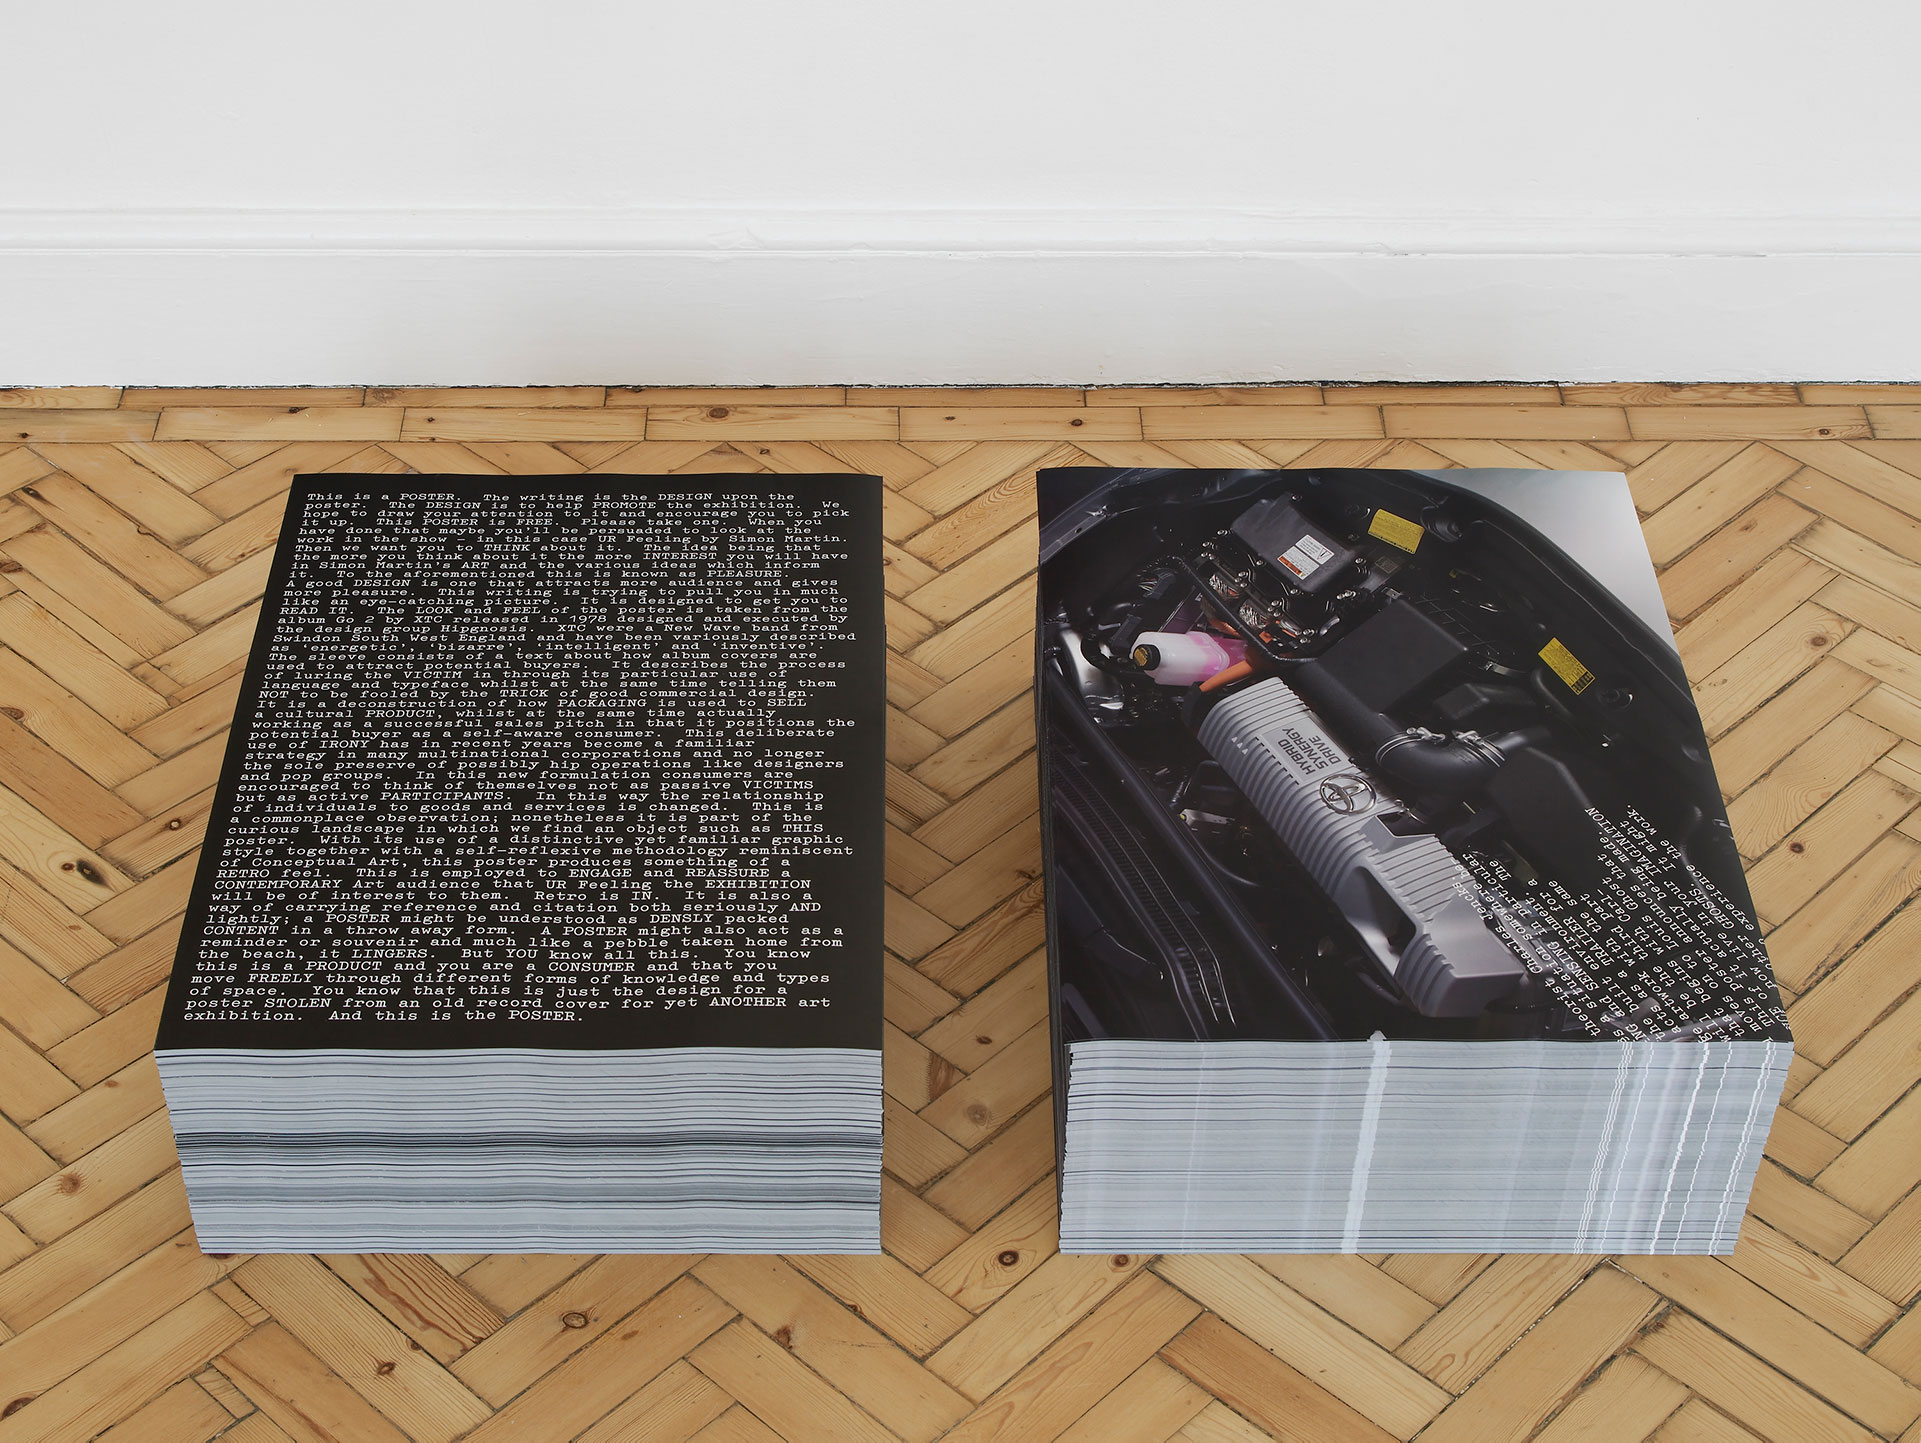 Stacks of posters on a parquet floor in the gallery